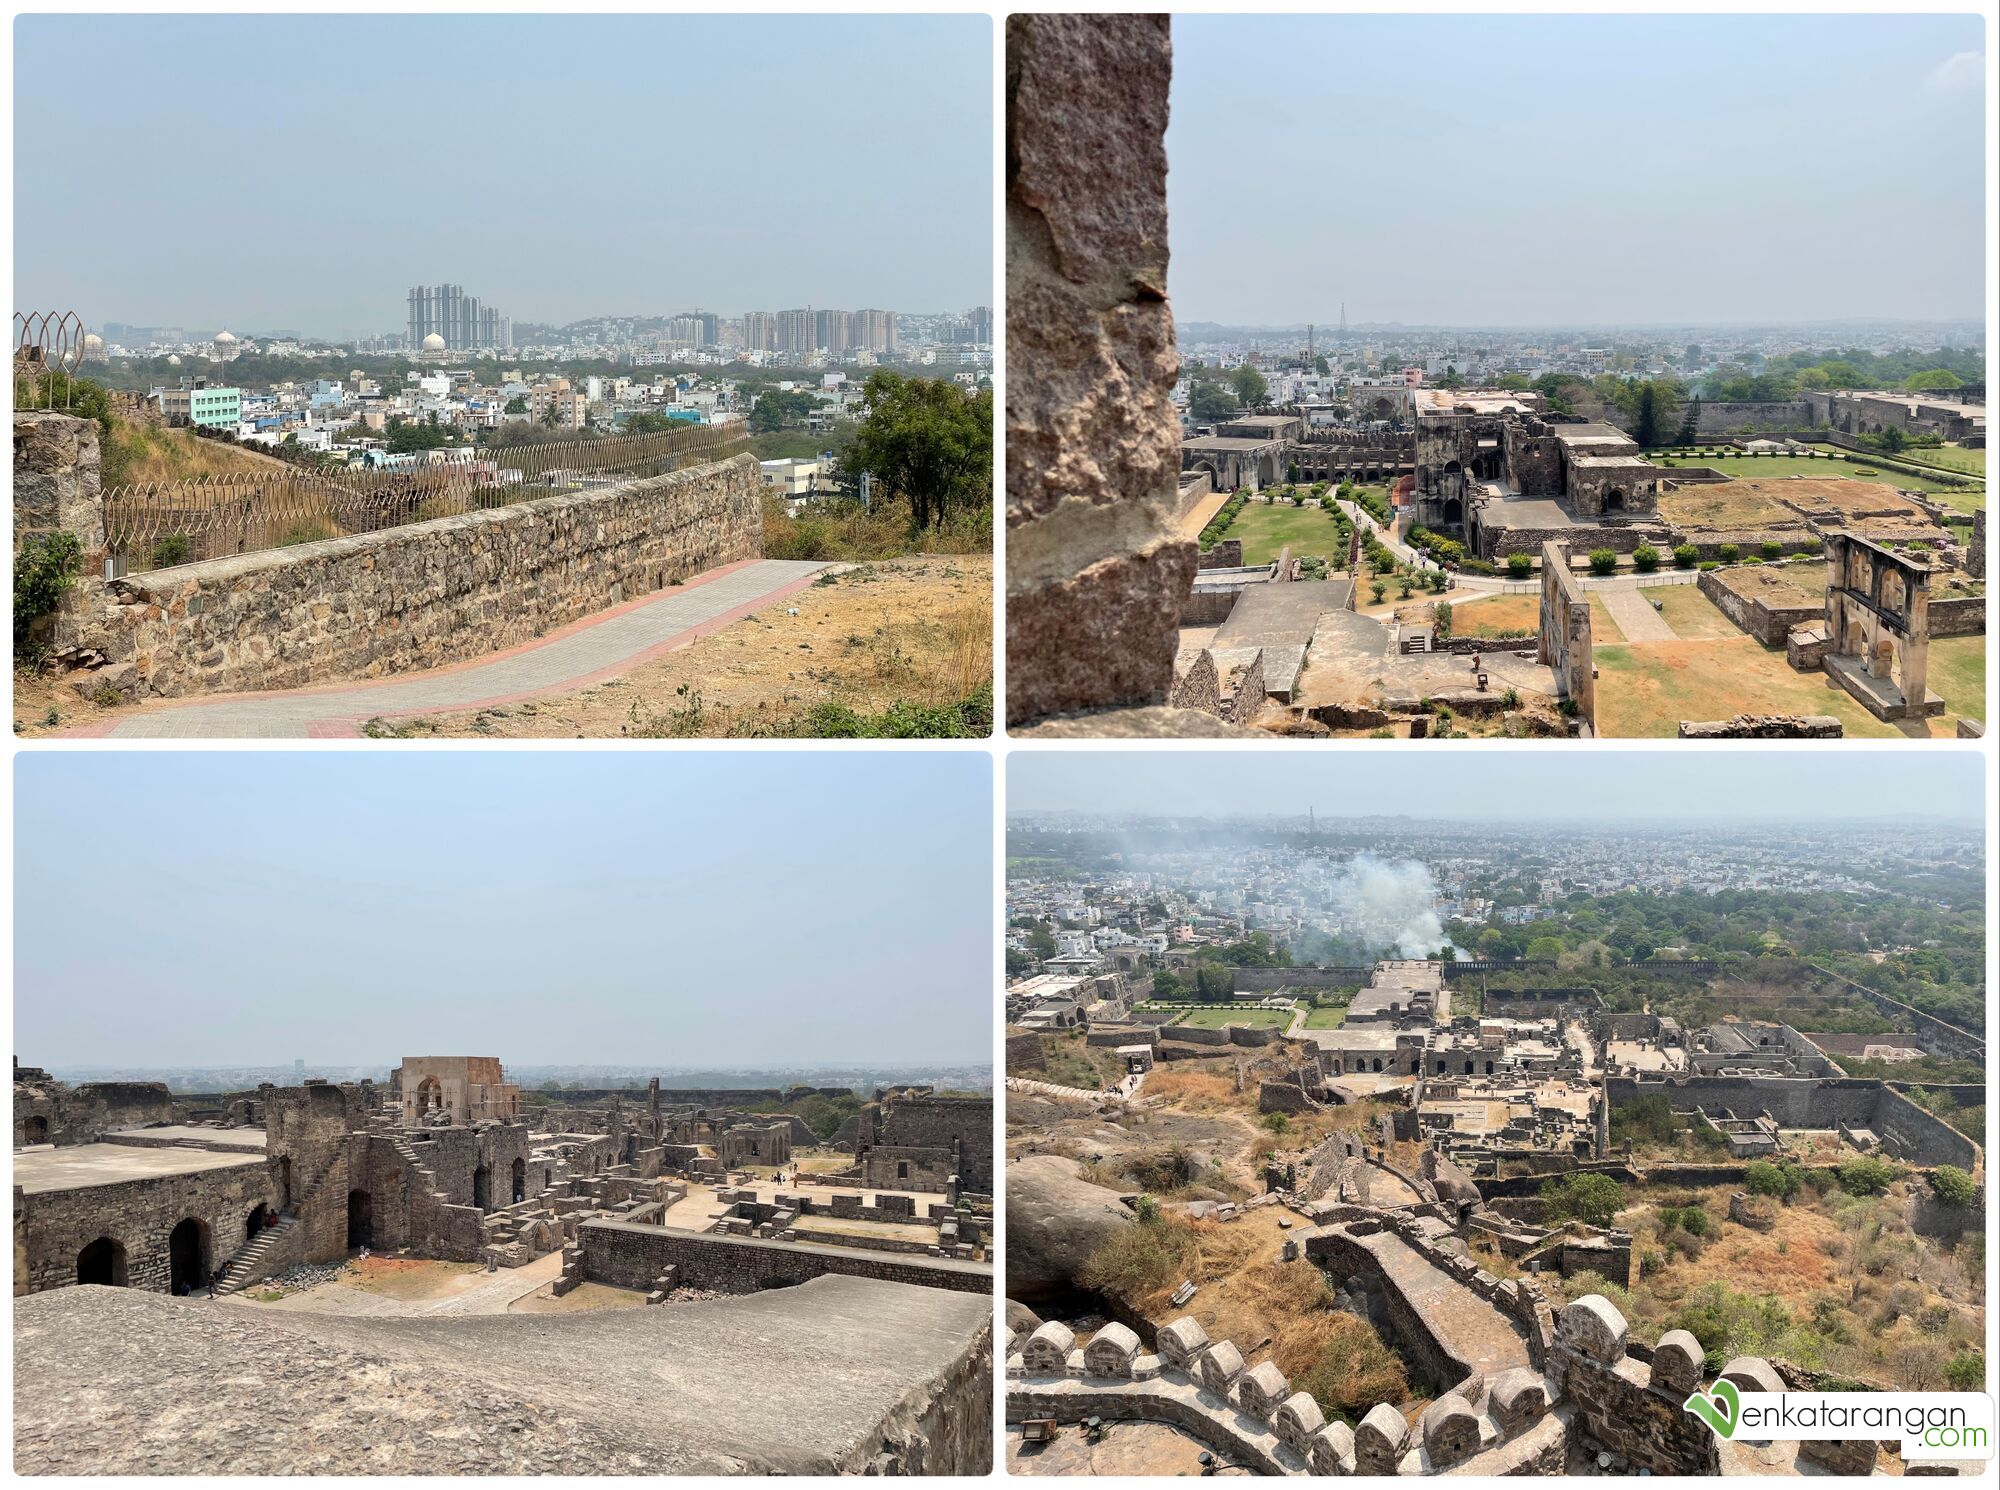 More views of the city downhill and ruins of Golconda Fort